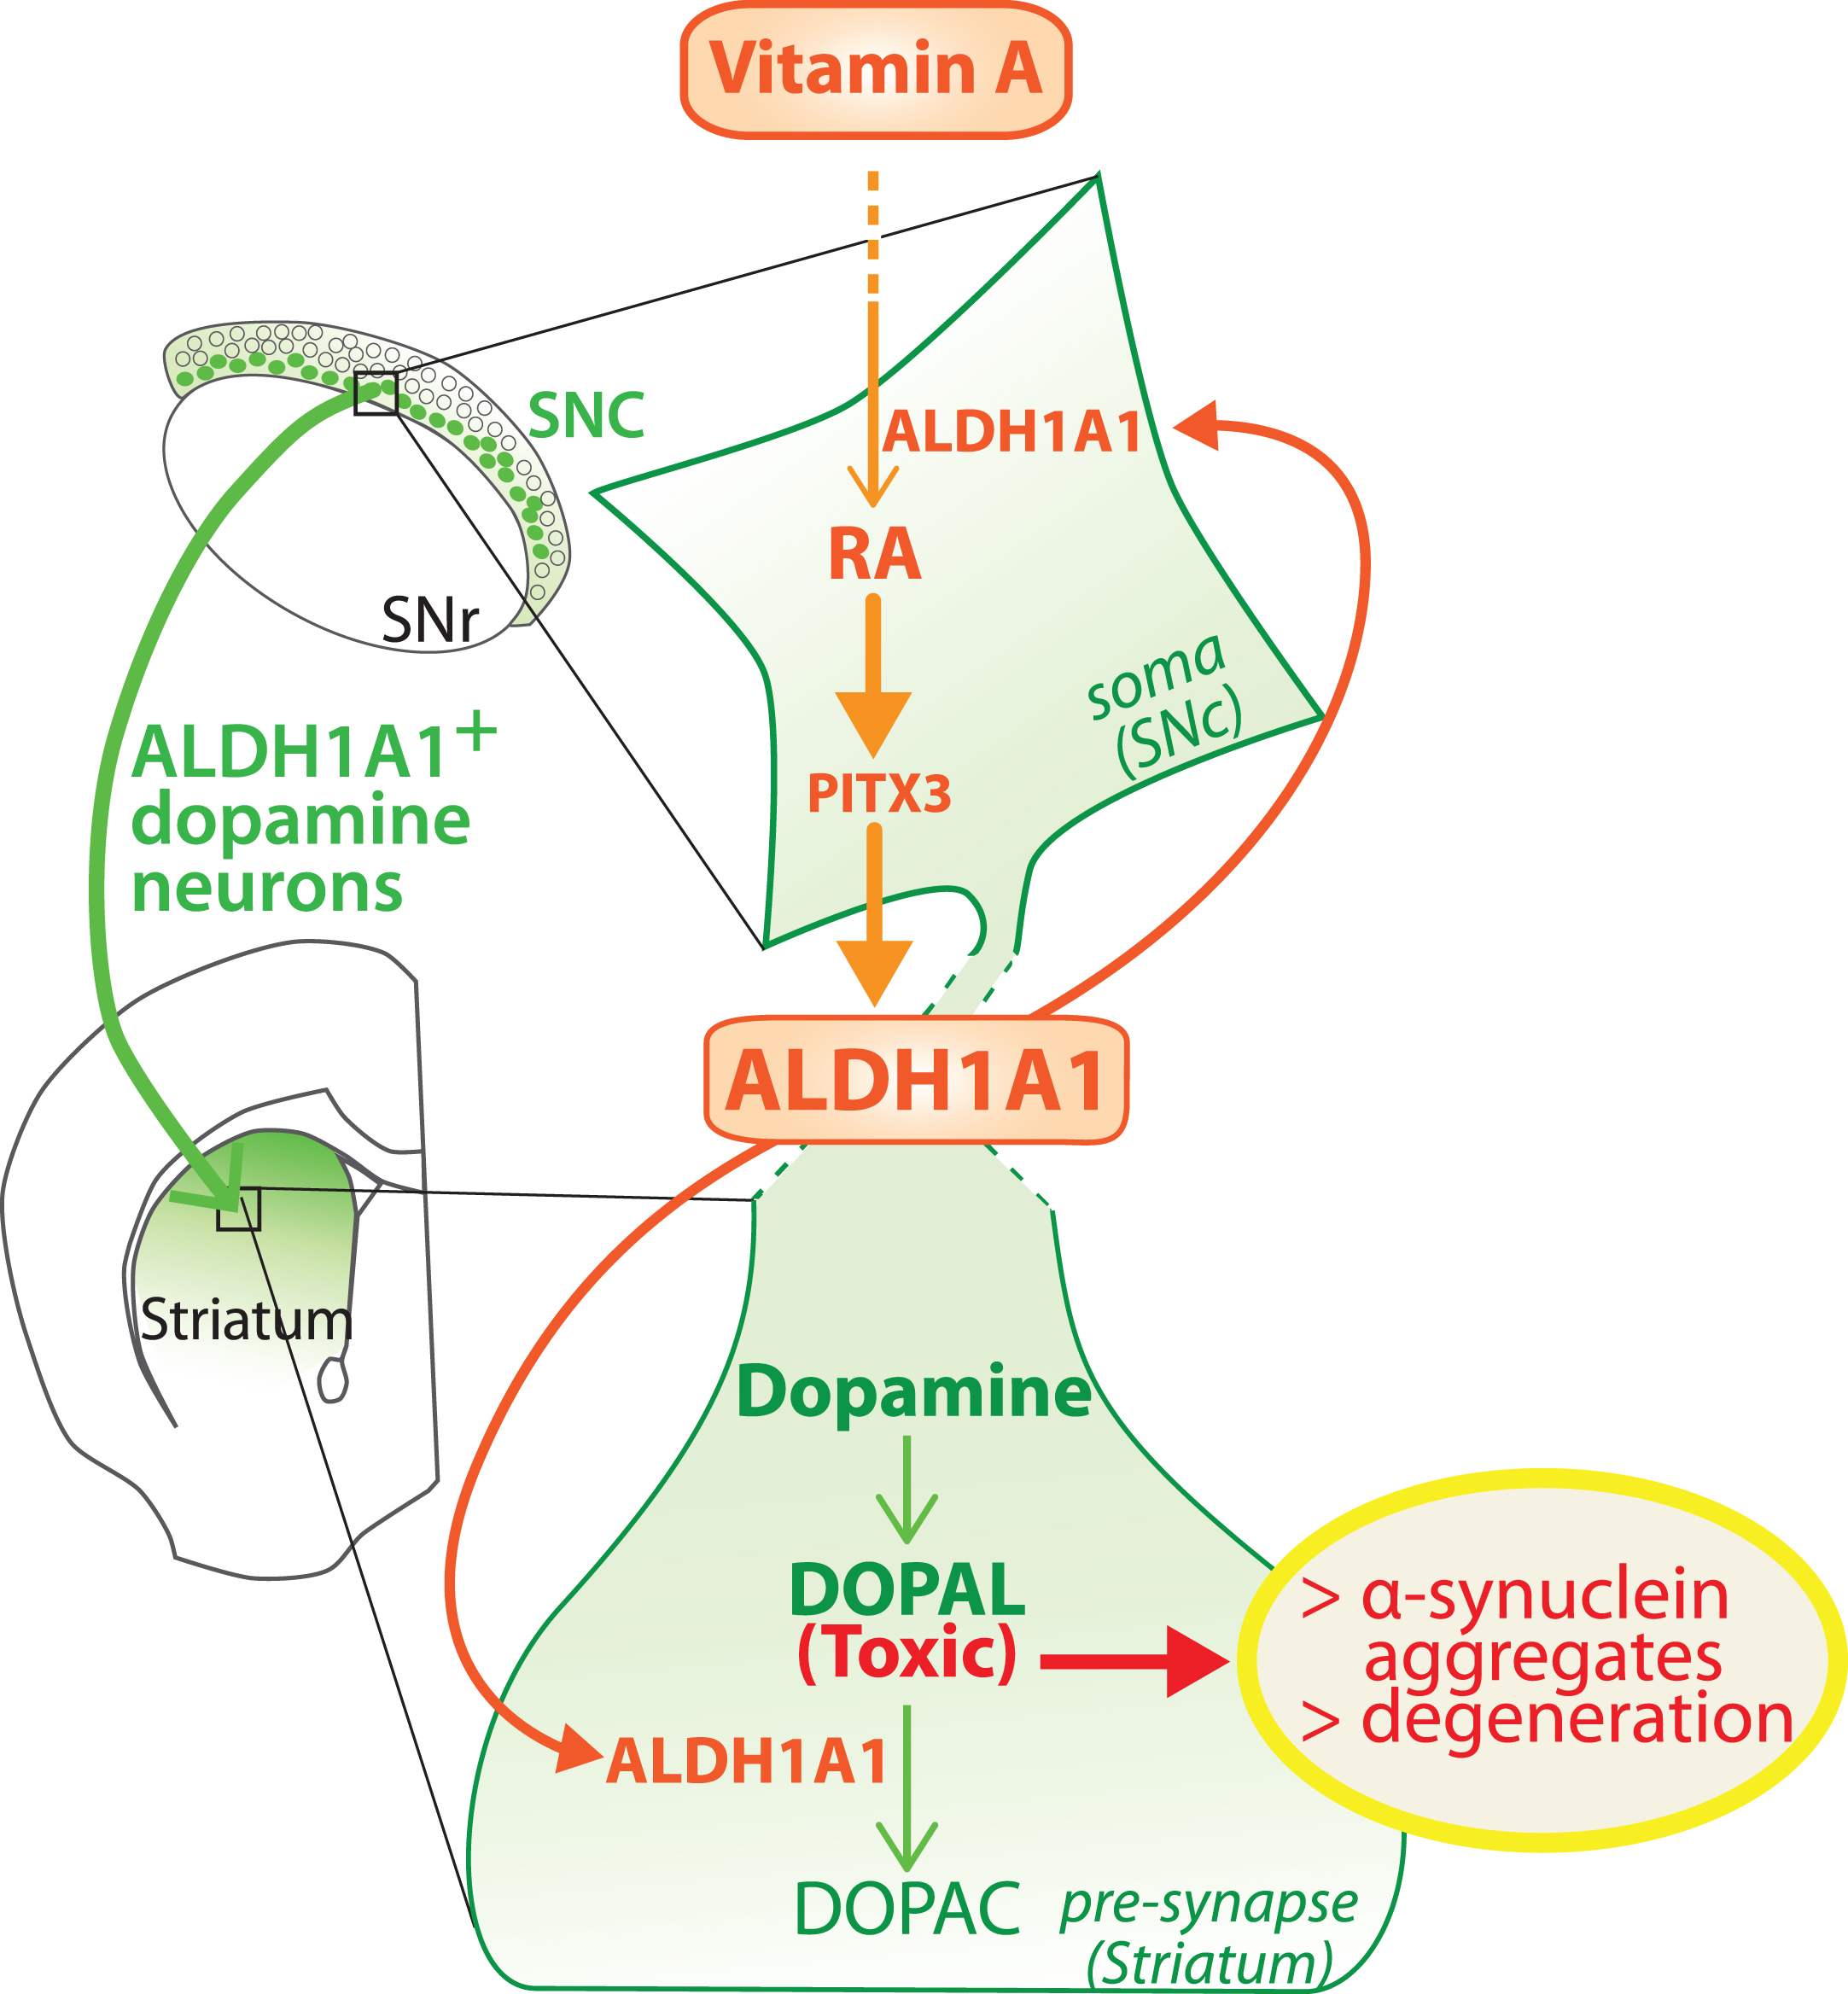 Model of the dual role played by ALDH1A1 in the nigro-striatal pathway. ALDH1A1 is involved in the metabolic pathway of RA because it synthesizes RA from retinal. In parallel, ALDH1A1 is involved in catabolic pathway of dopamine because it degrades DOPAL to DOPAC. Considering that RA controls the expression of ALDH1A1 through PITX3, the model proposes that ALDH1A1 expression is controlled by vitamin A bioavailability. SNc, substantia nigra pars compacta; SNR, substantia nigra pars reticulata.